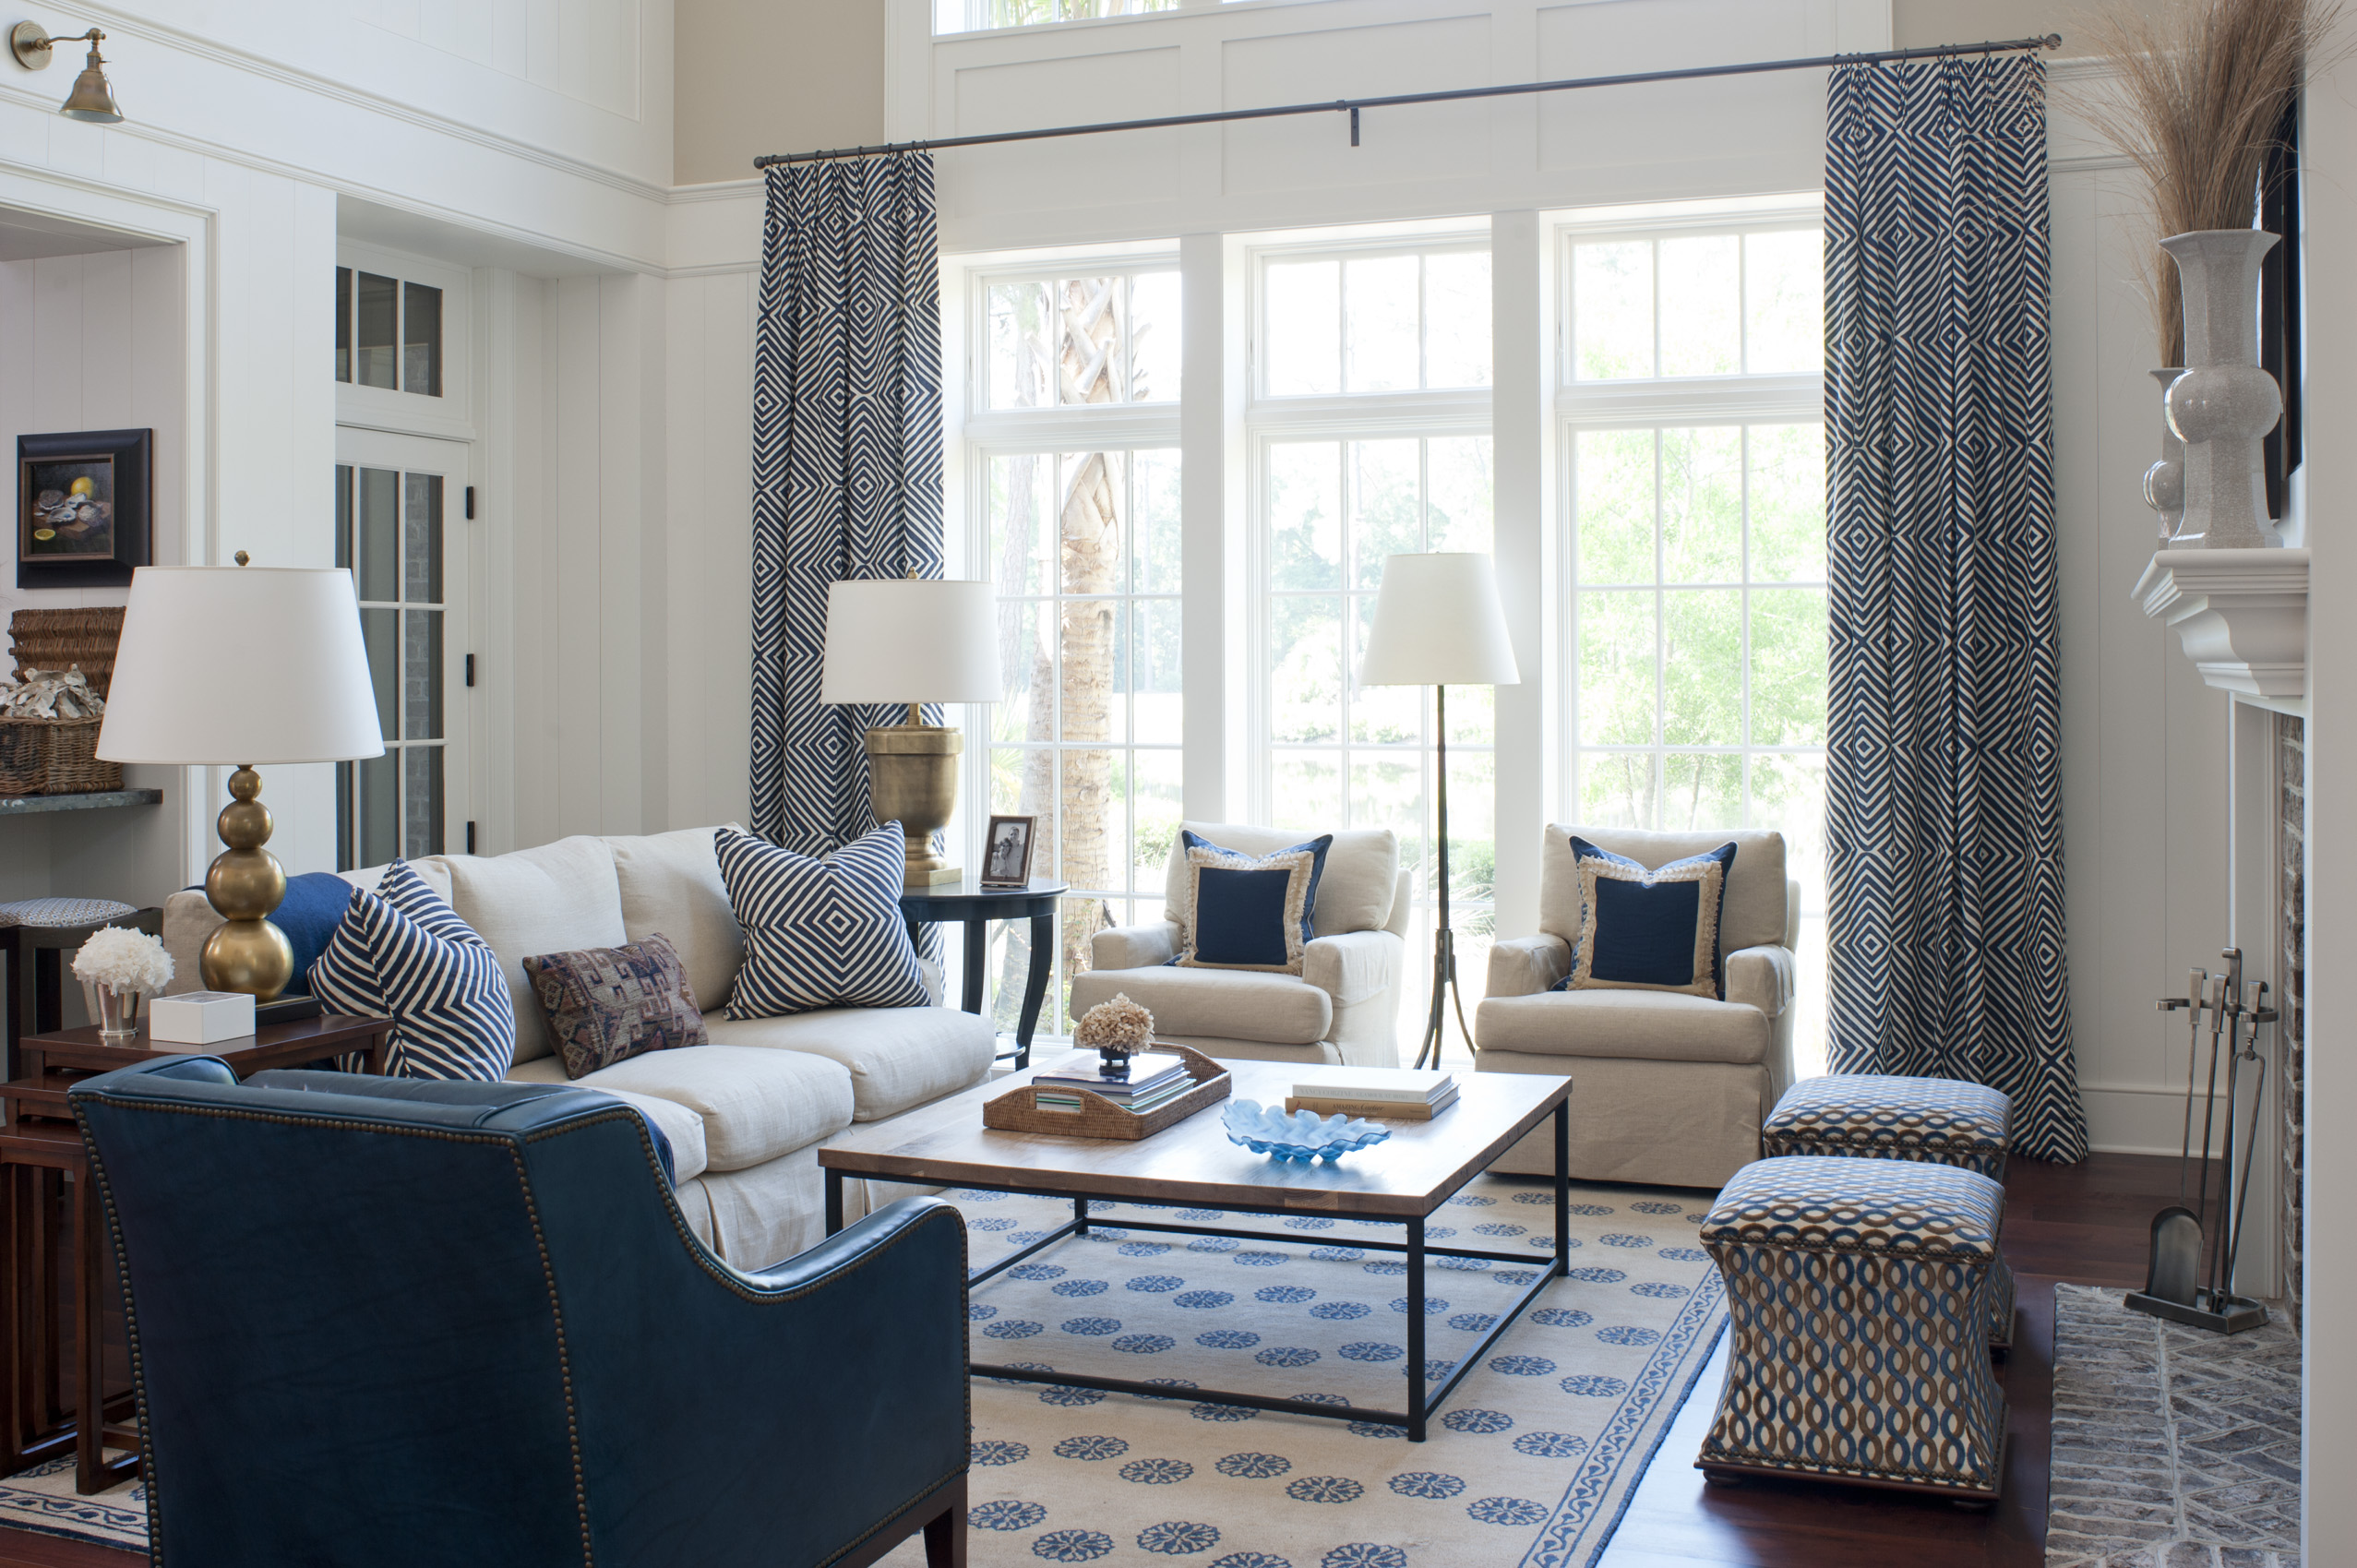 mixing textile patterns is a talent of the professionals at j banks design as is illustrated by this coastal-inspired living room